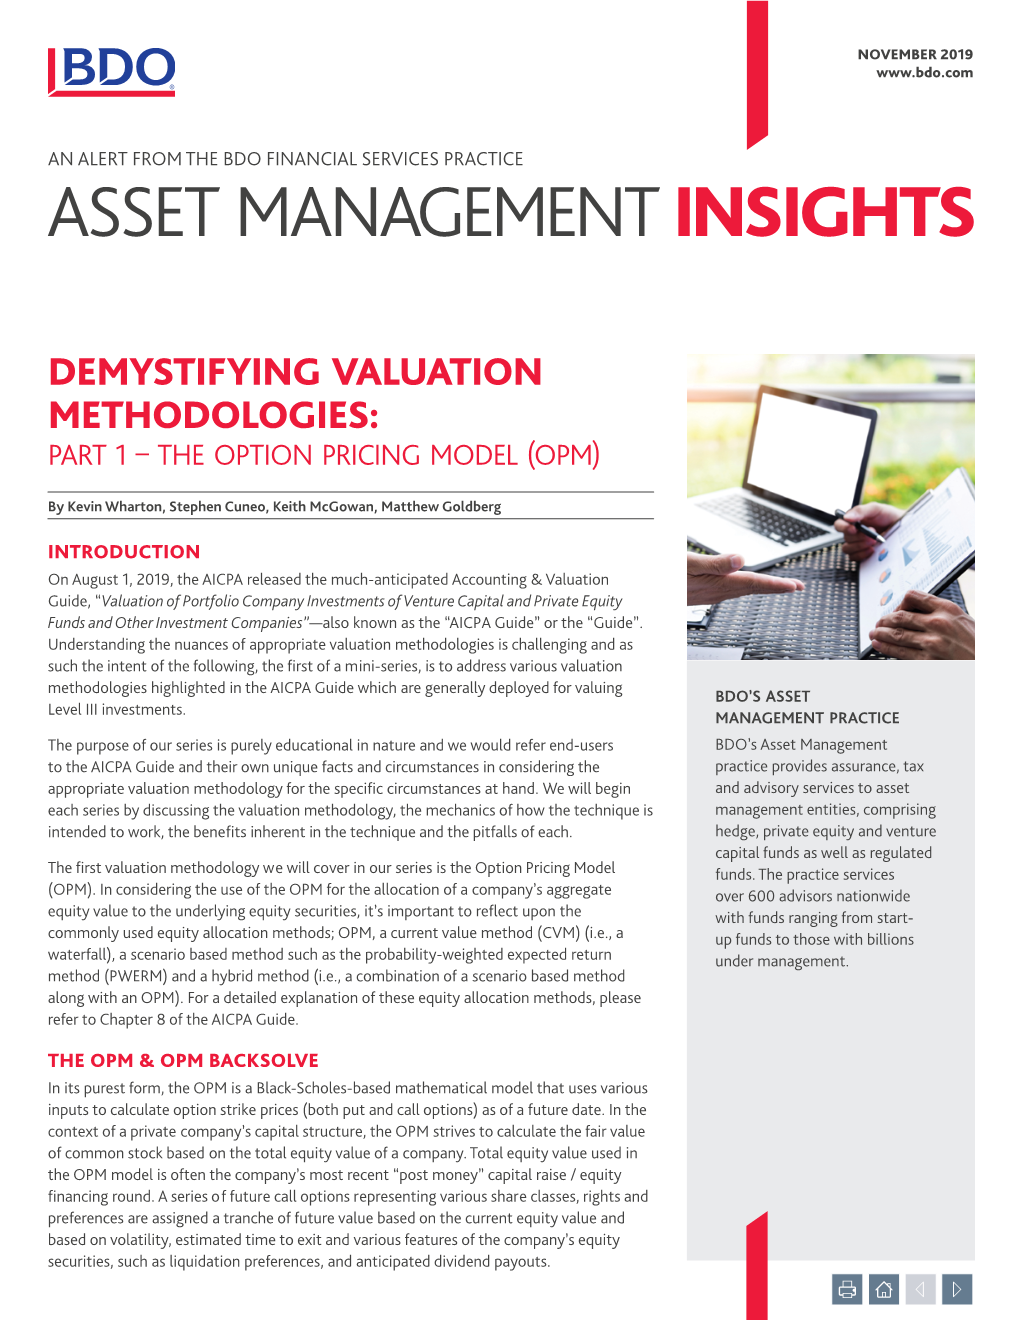 Demystifying Valuation Methodologies: Part 1 – the Option Pricing Model (Opm)